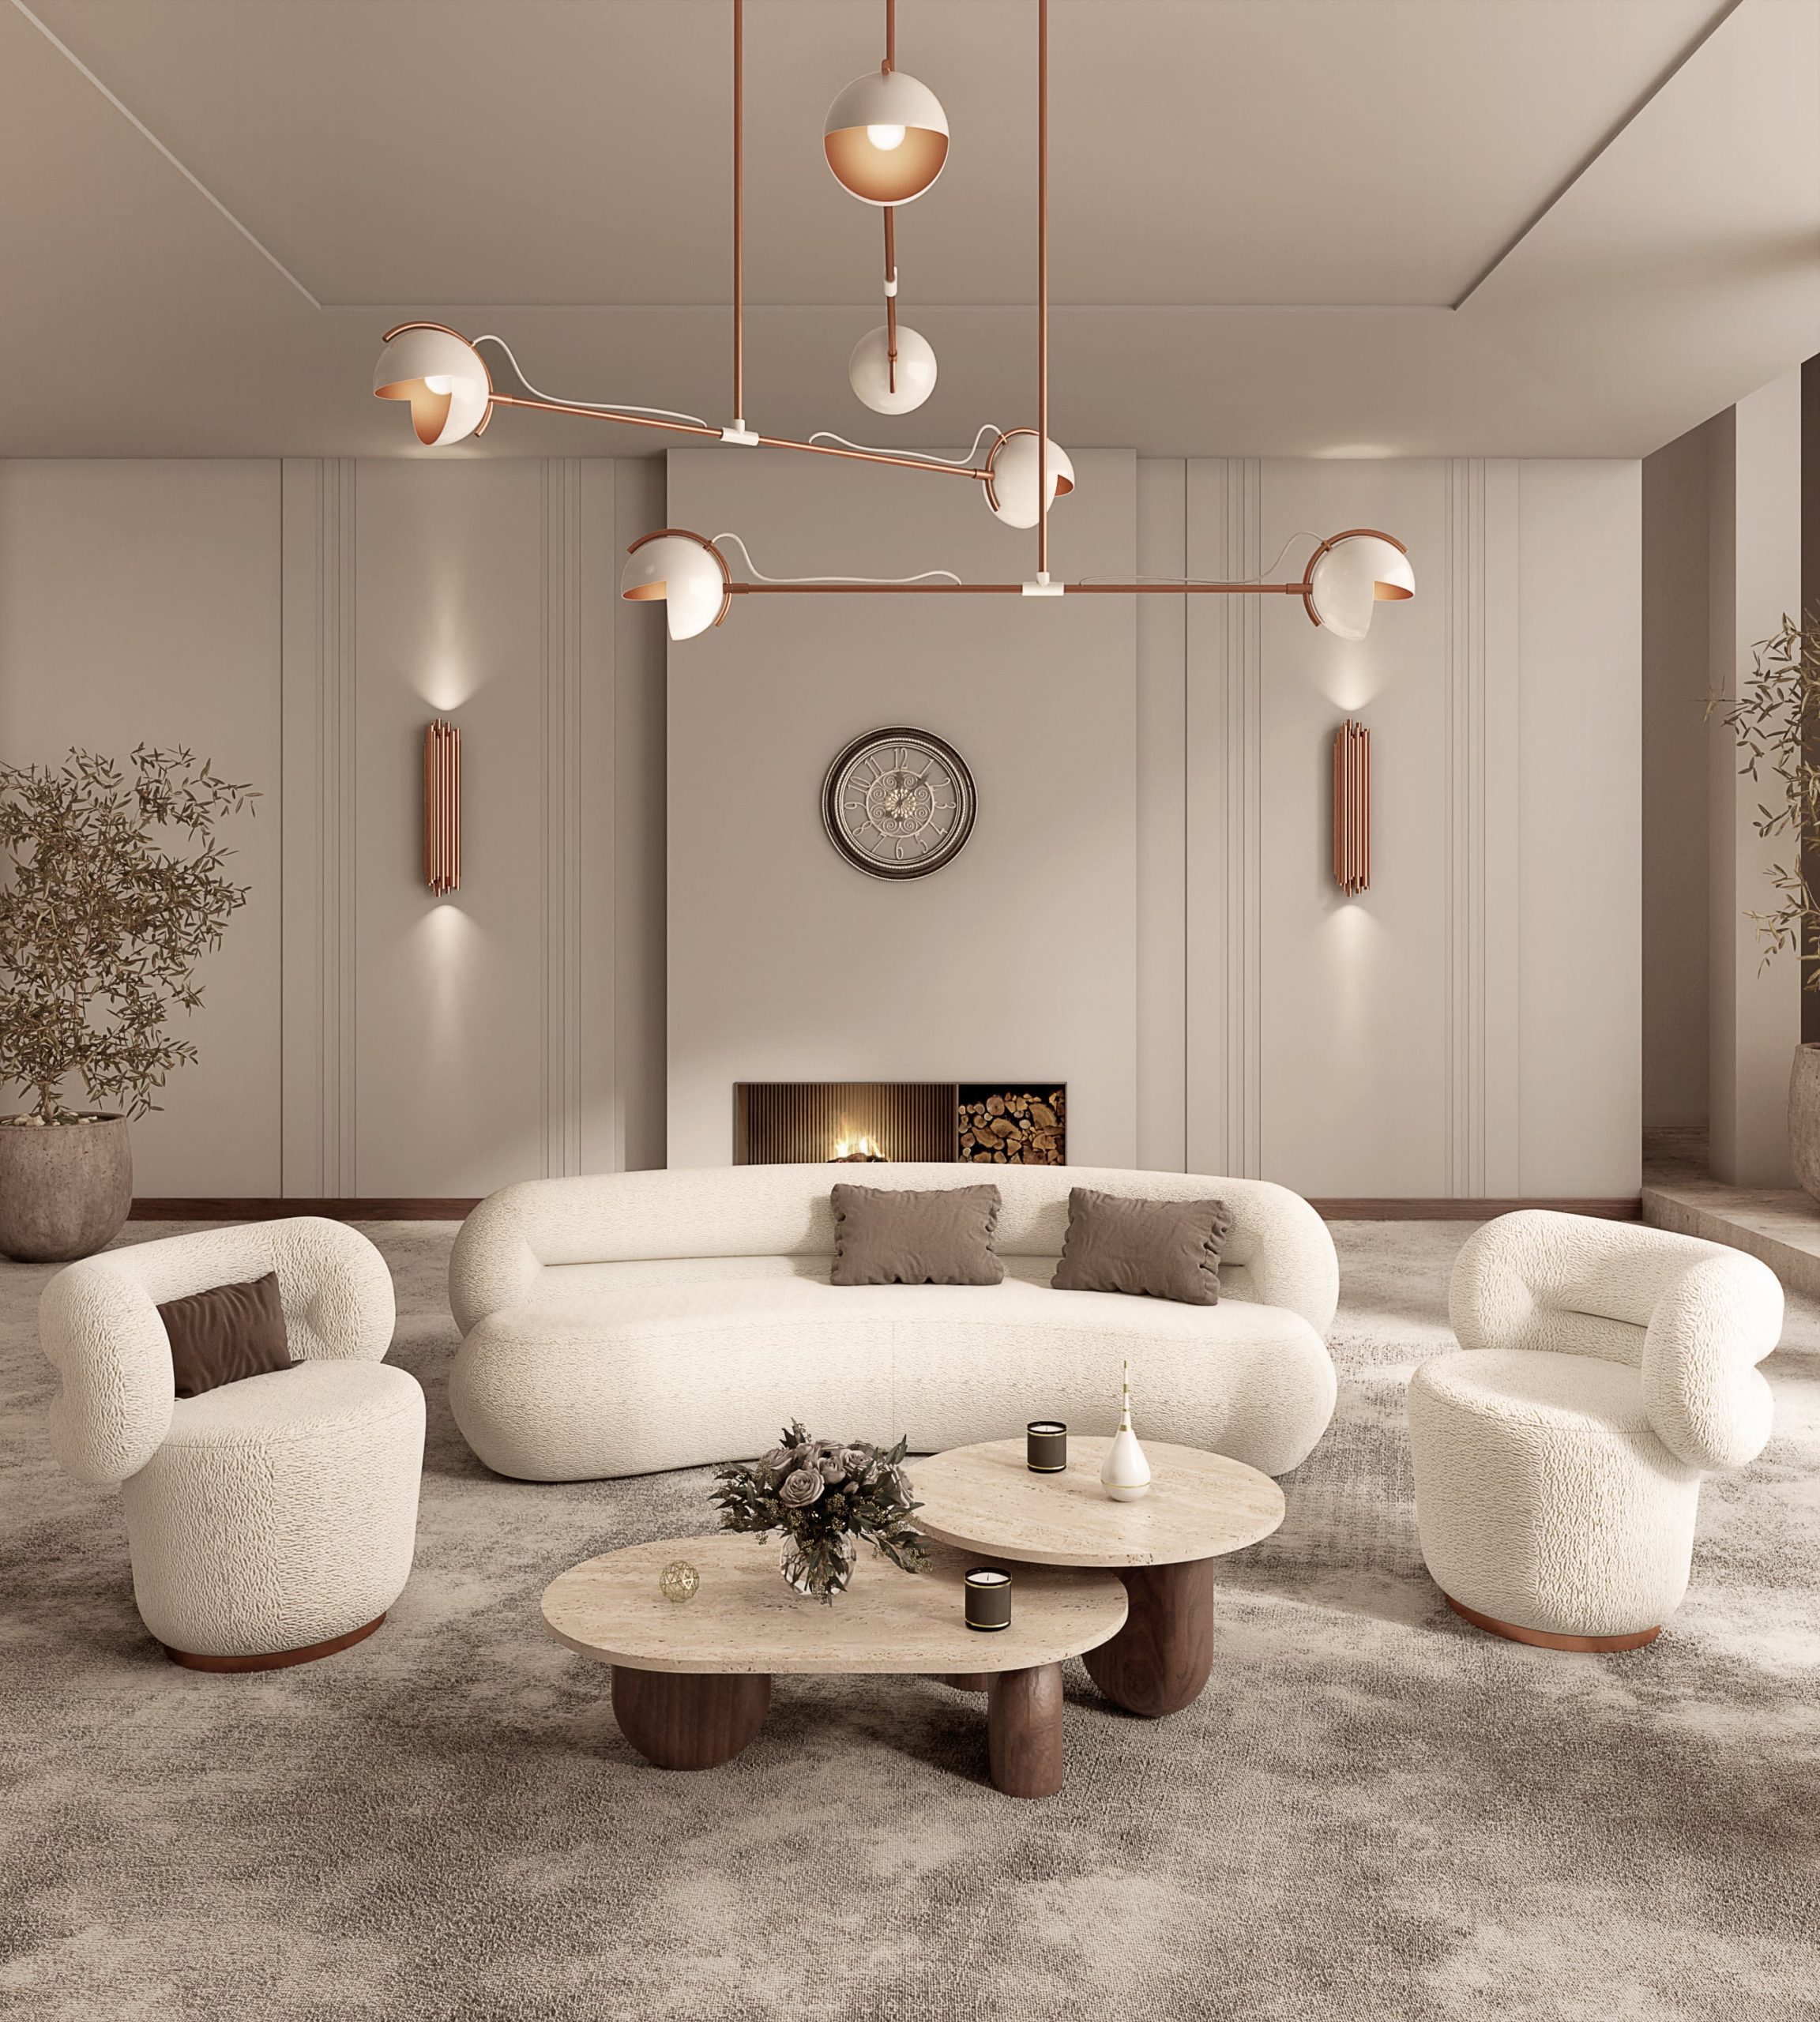 TIMELESS LIVING ROOM DESIGN WITH LUXURY FURNISHINGS